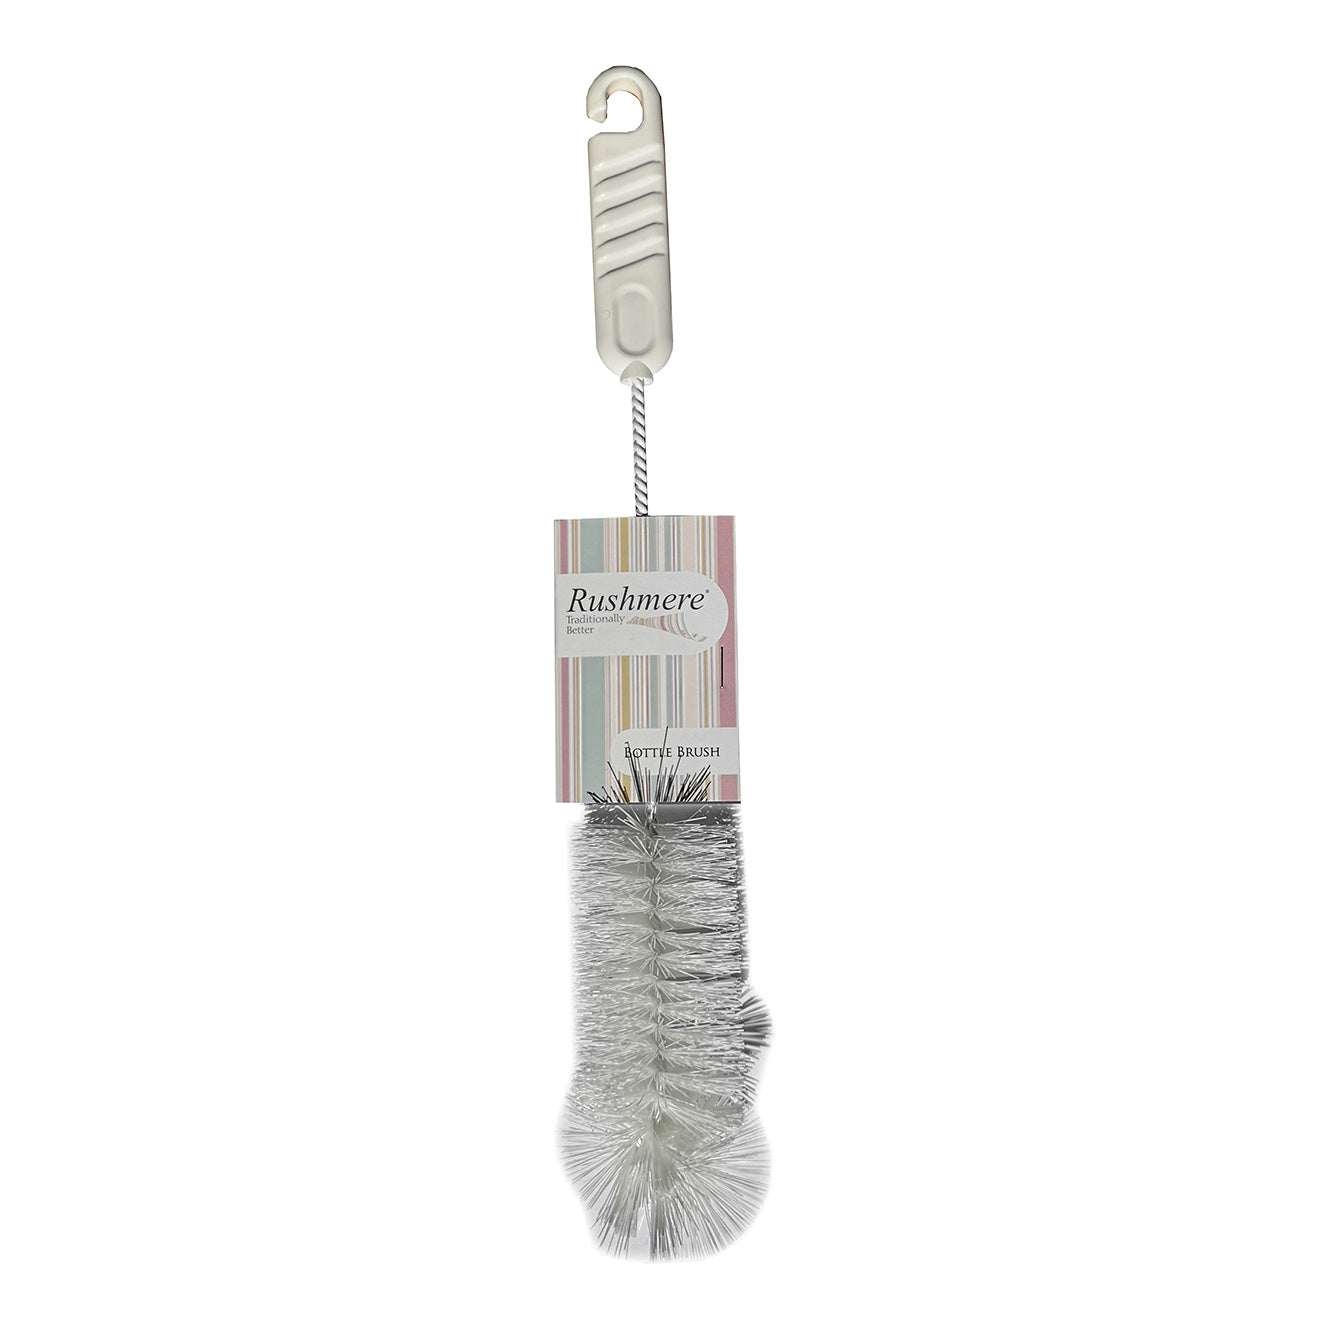 Rushmere Large Bottle Brush - Plastic Handle - Premium Brushes / Brooms from Wilsons - Just $3.75! Shop now at W Hurst & Son (IW) Ltd